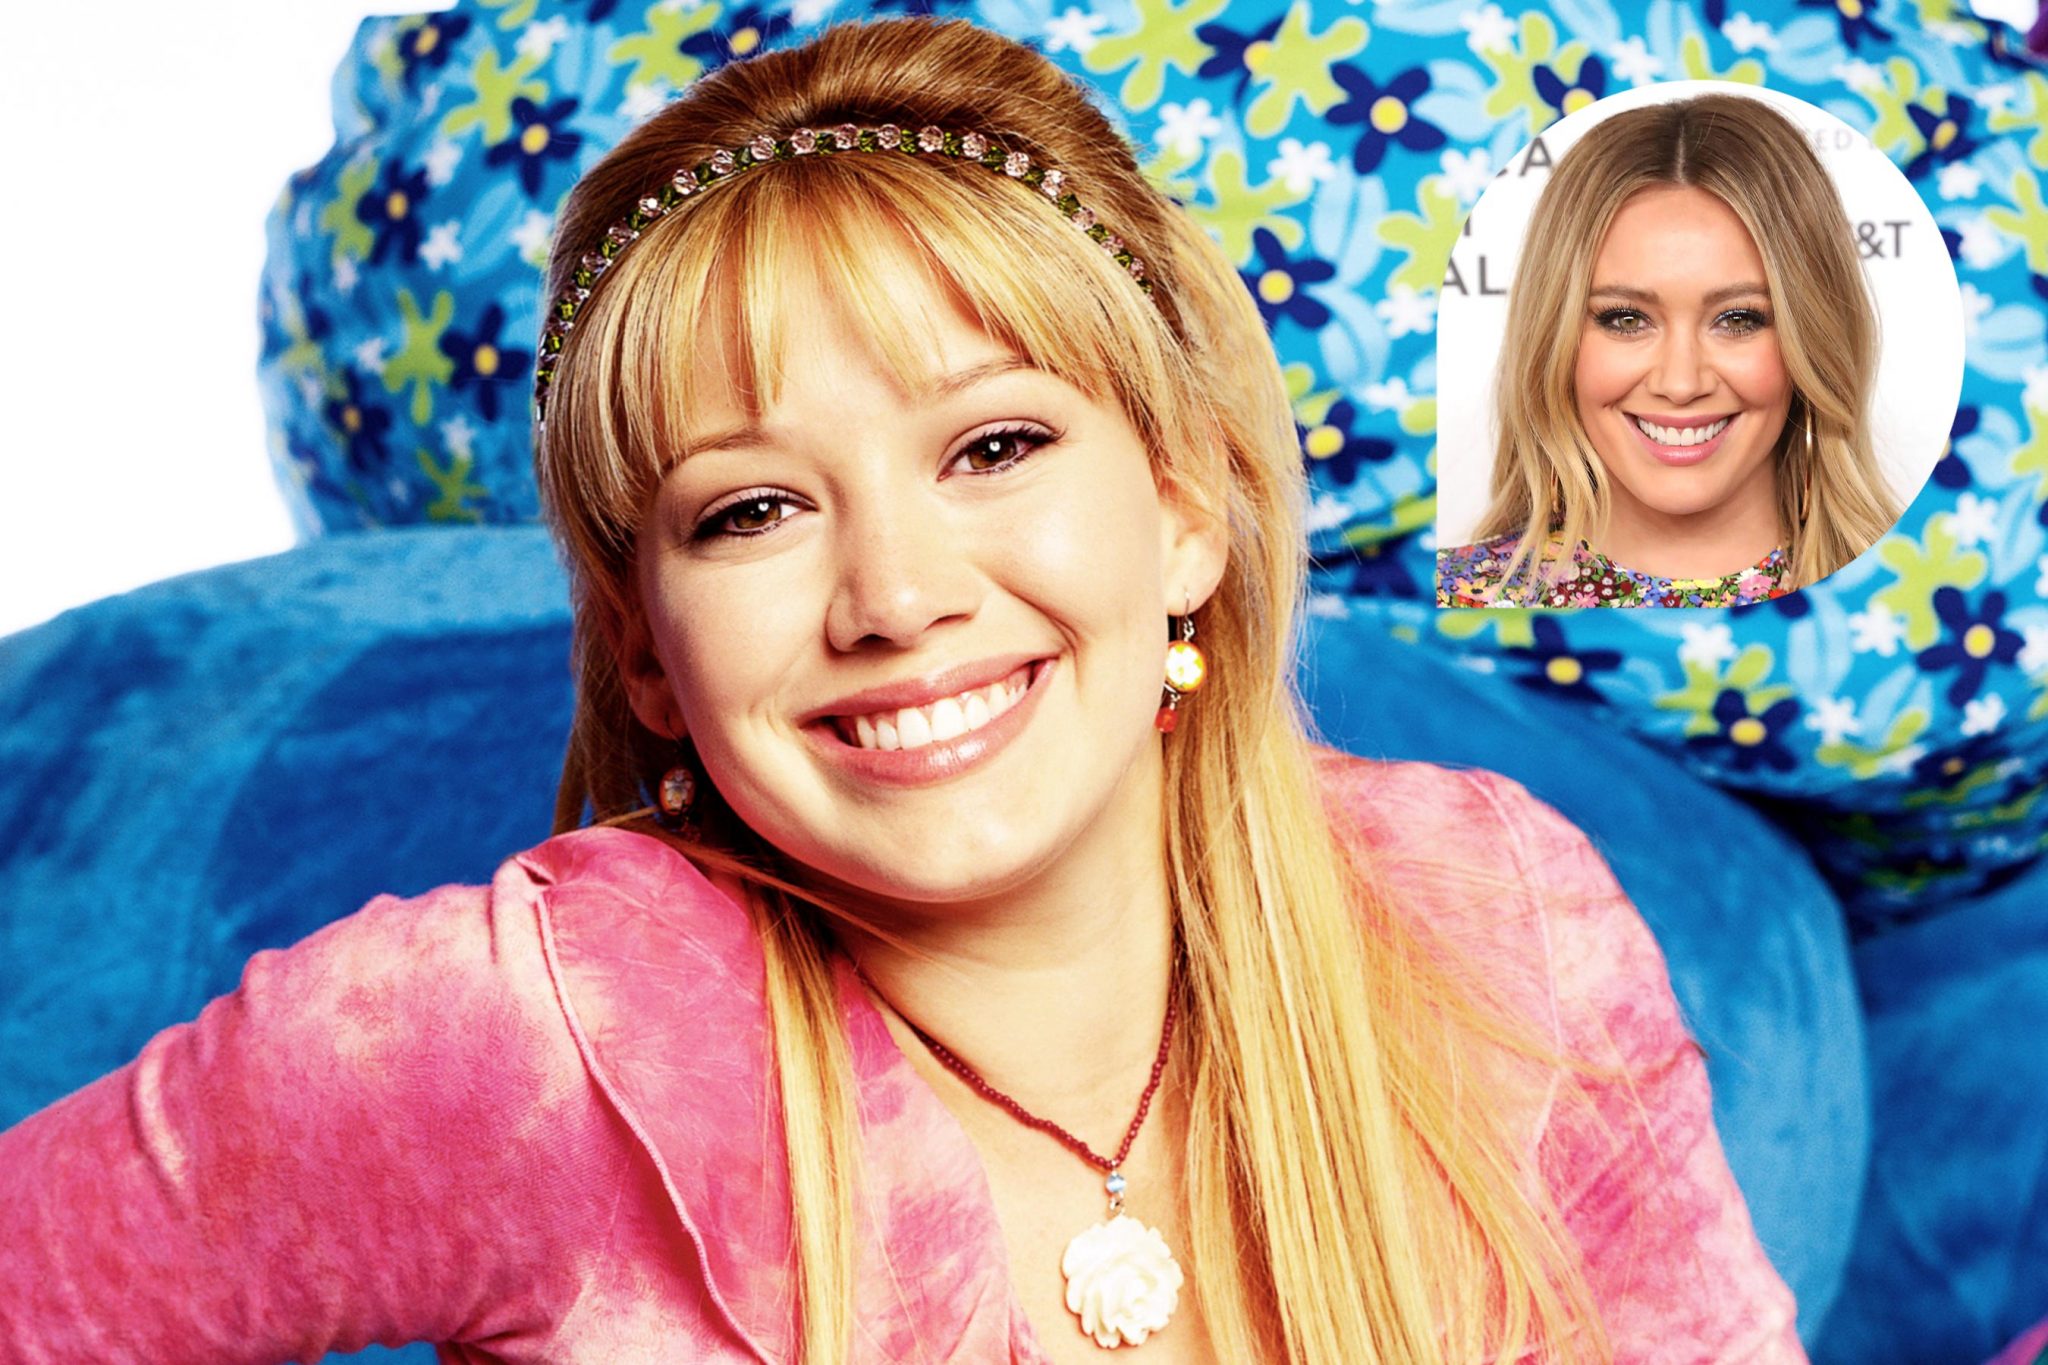 Hilary Duff As Lizzie McGuire